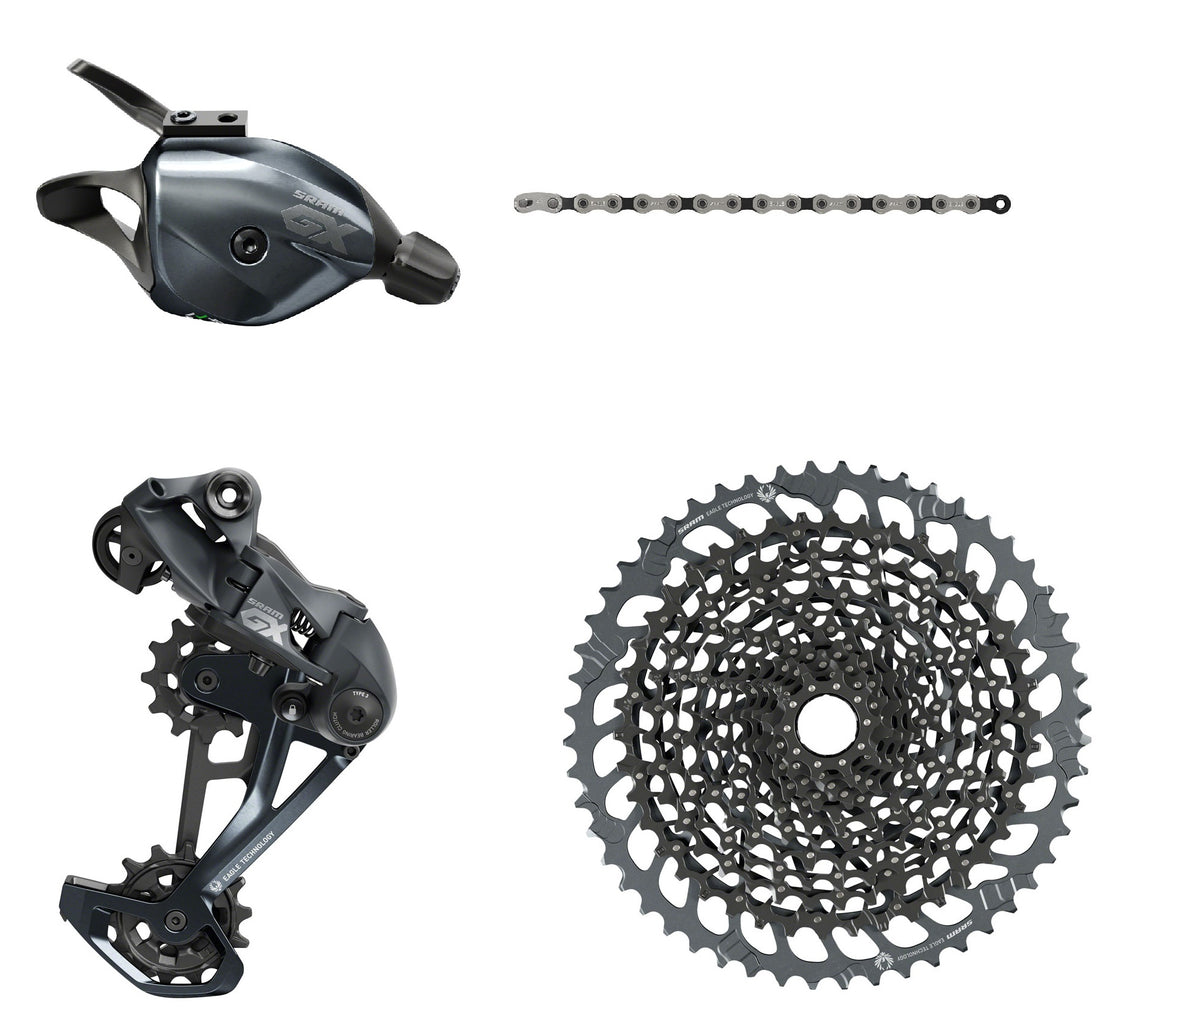 shifter and derailleur